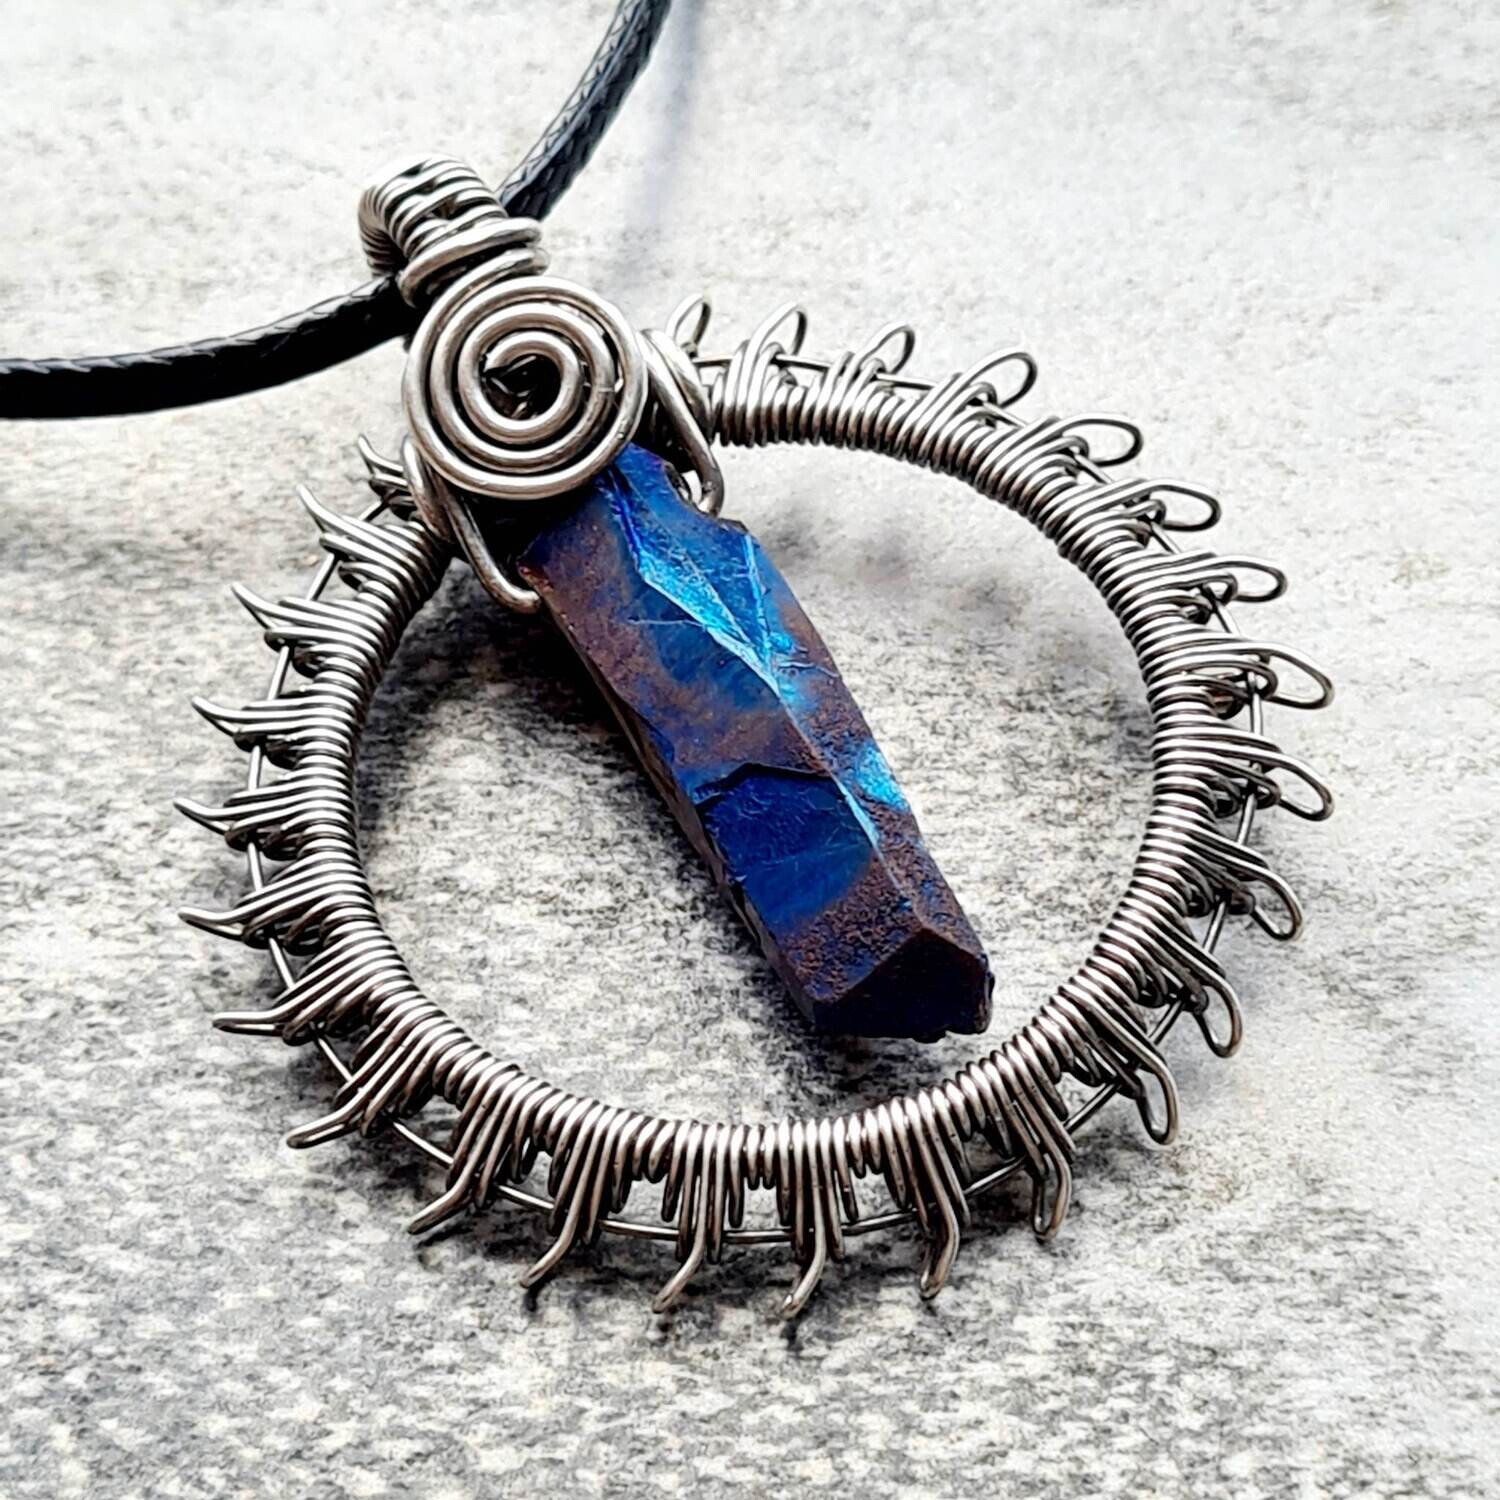 COBALT SUN - Rainbow Electroplated Cobalt Quartz in sterling silver with necklace.